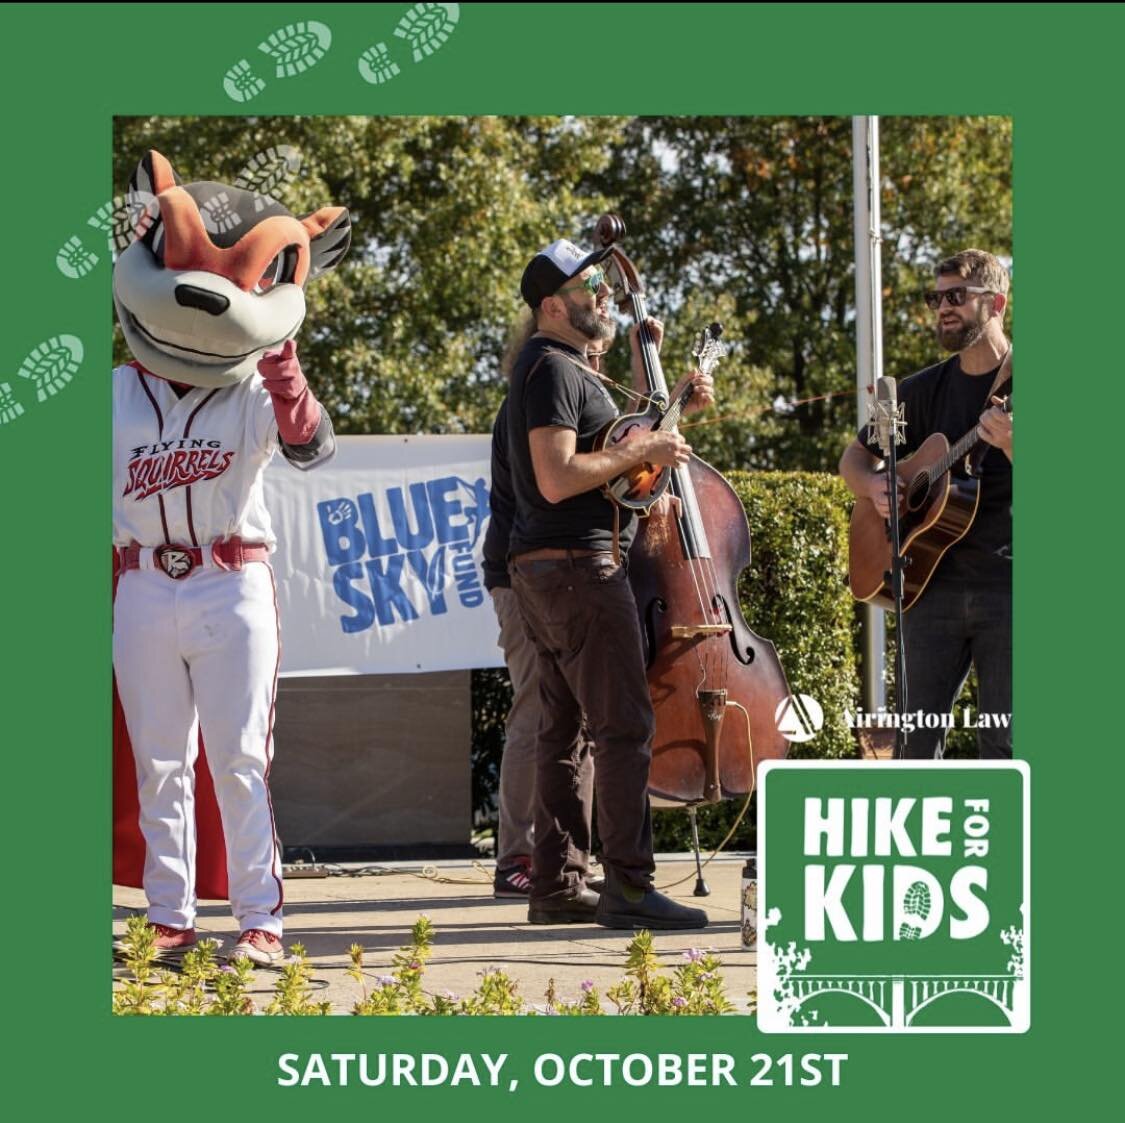 Excited to play today for Blue Sky Fund&rsquo;s Hike For Kids! You can still do walk up registration today at the VA War Memorial, or just rock up at 1ish for some great food, drink, fun, and tunes! 

#lastminutebestminute #nutsy #blueskyfund #hike4k